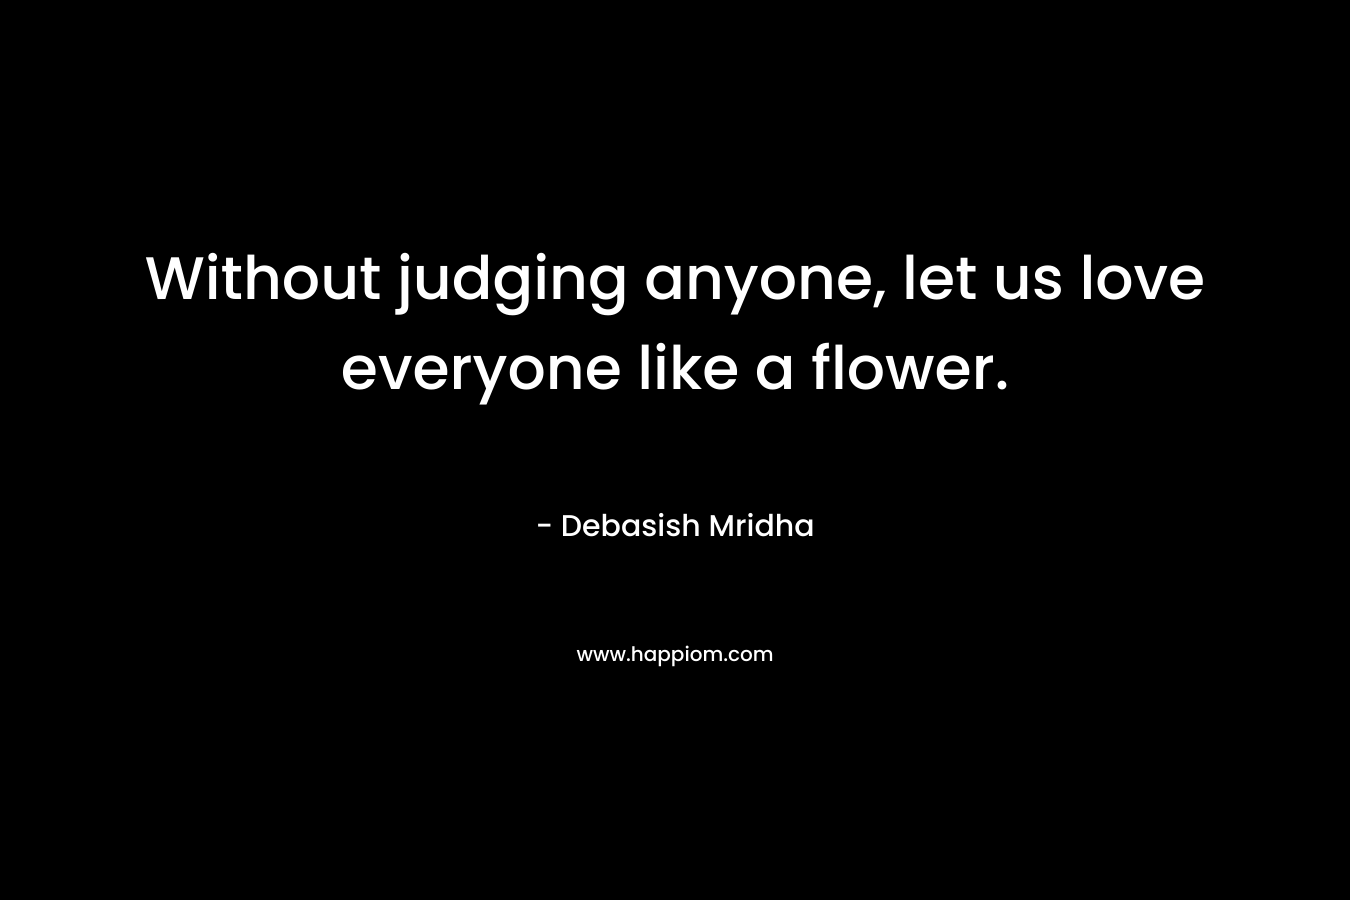 Without judging anyone, let us love everyone like a flower.